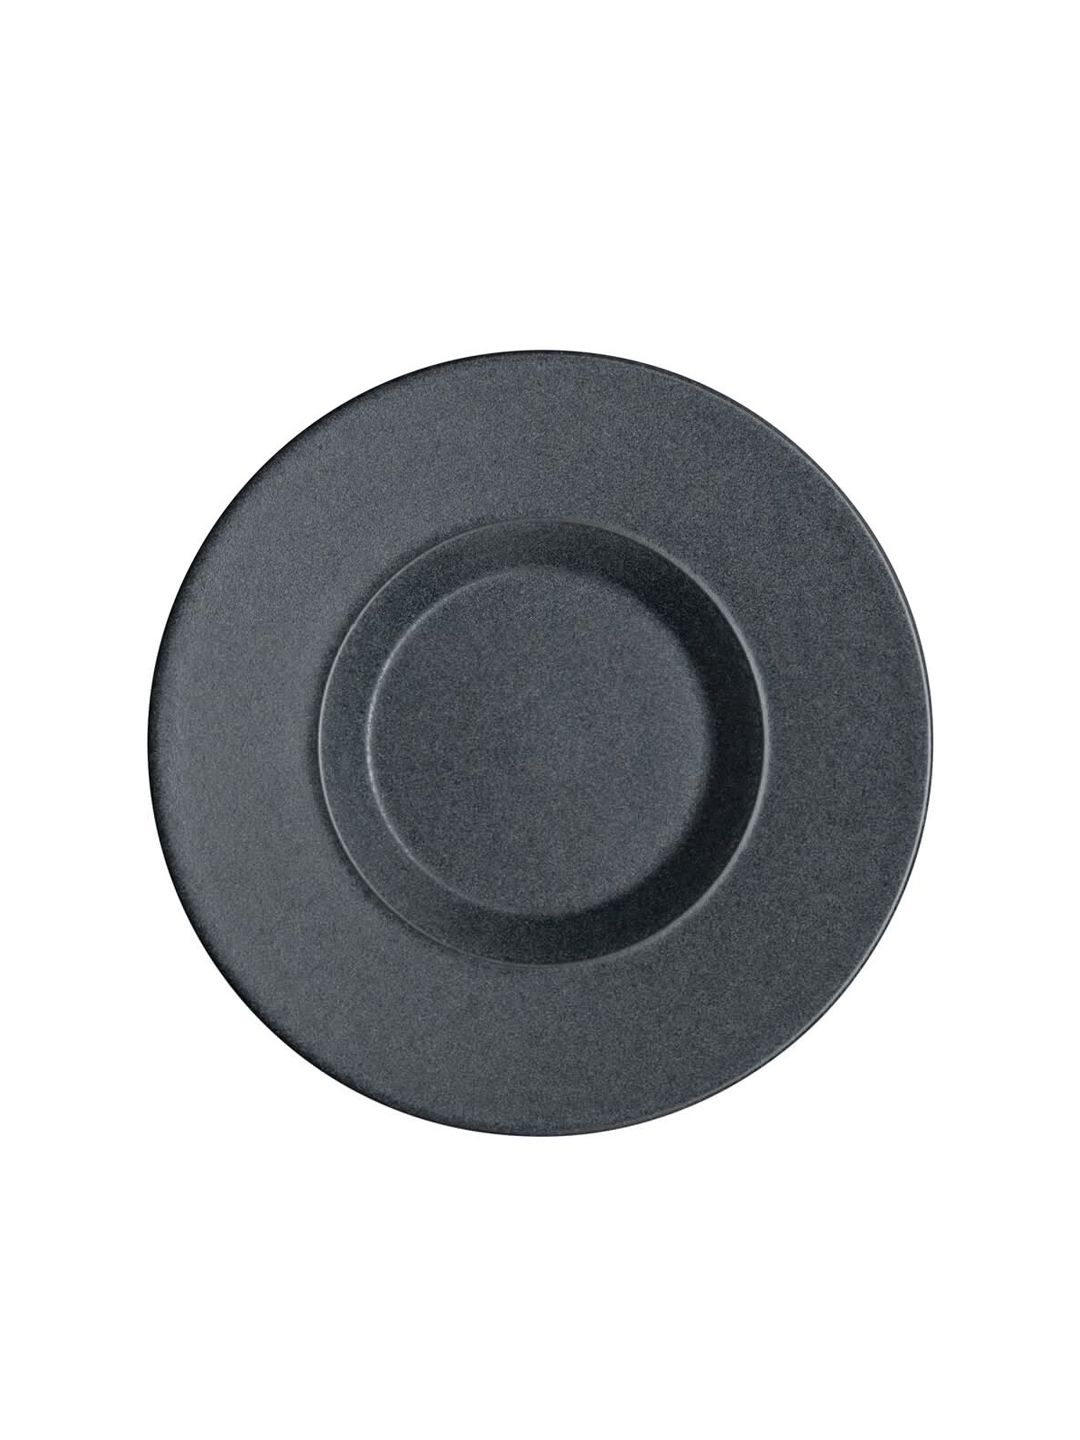 Denby Charcoal Grey thinKitchen Impression Tea & Coffee Saucer Price in India